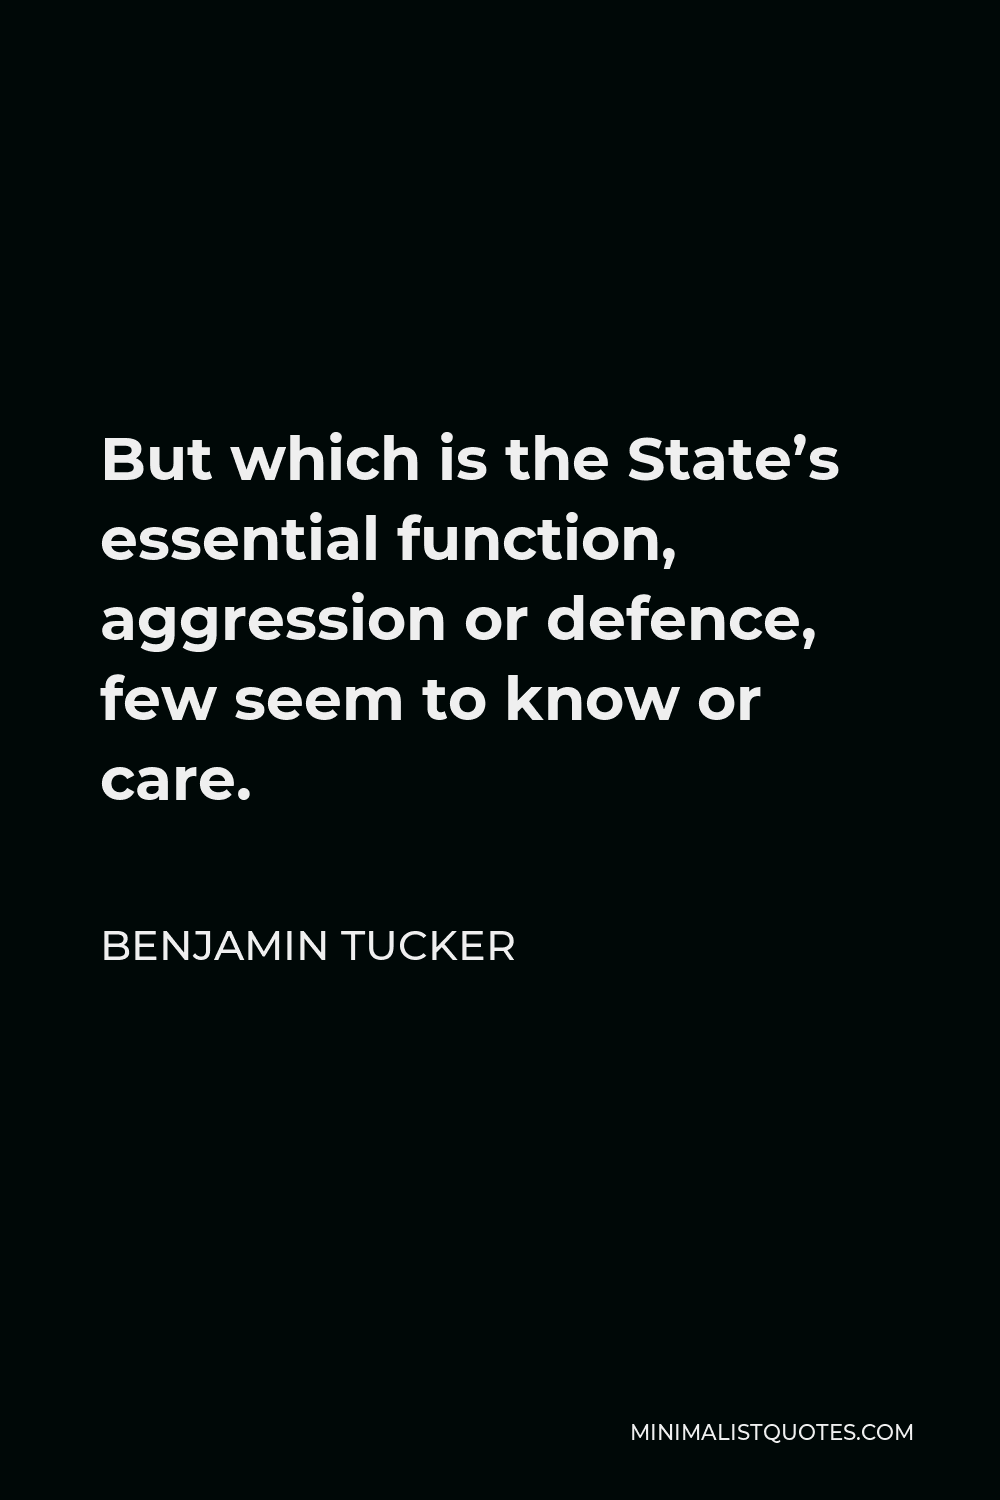 Benjamin Tucker Quote - But which is the State’s essential function, aggression or defence, few seem to know or care.